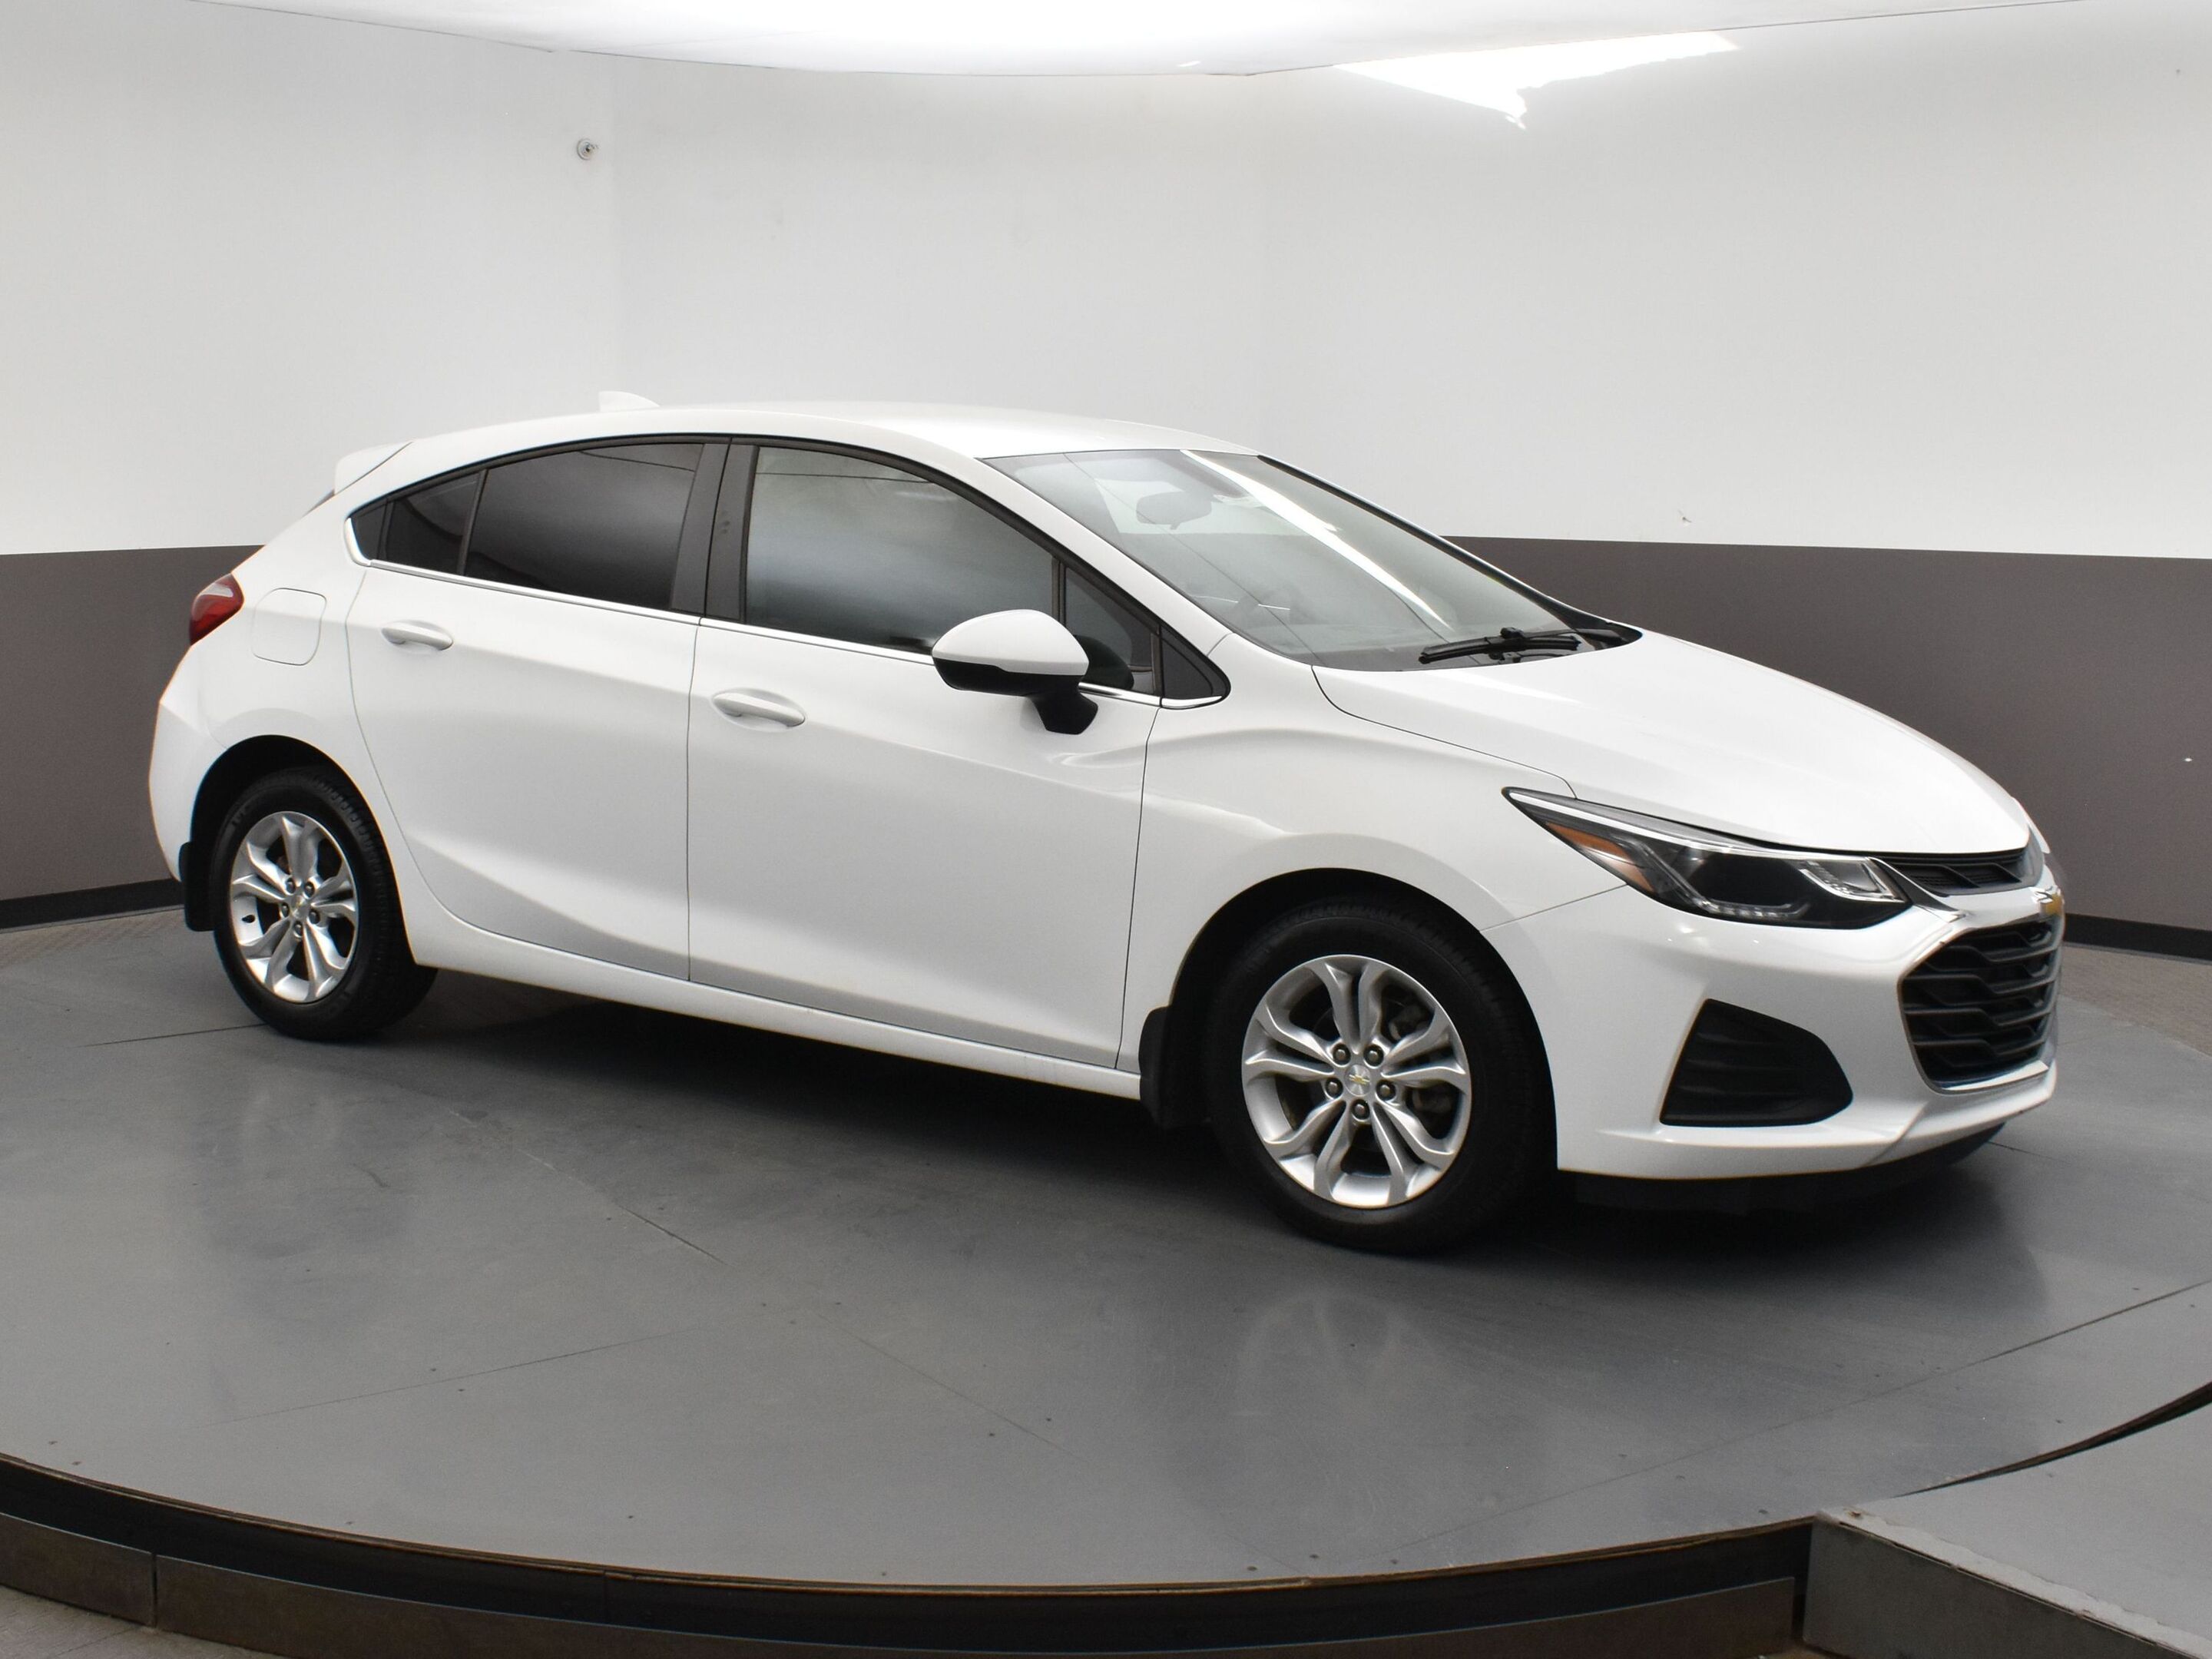 2019 Chevrolet Cruze Hatchback LT with CLIMATE CONTROL, CARPLAY, HEATED SEATS AND